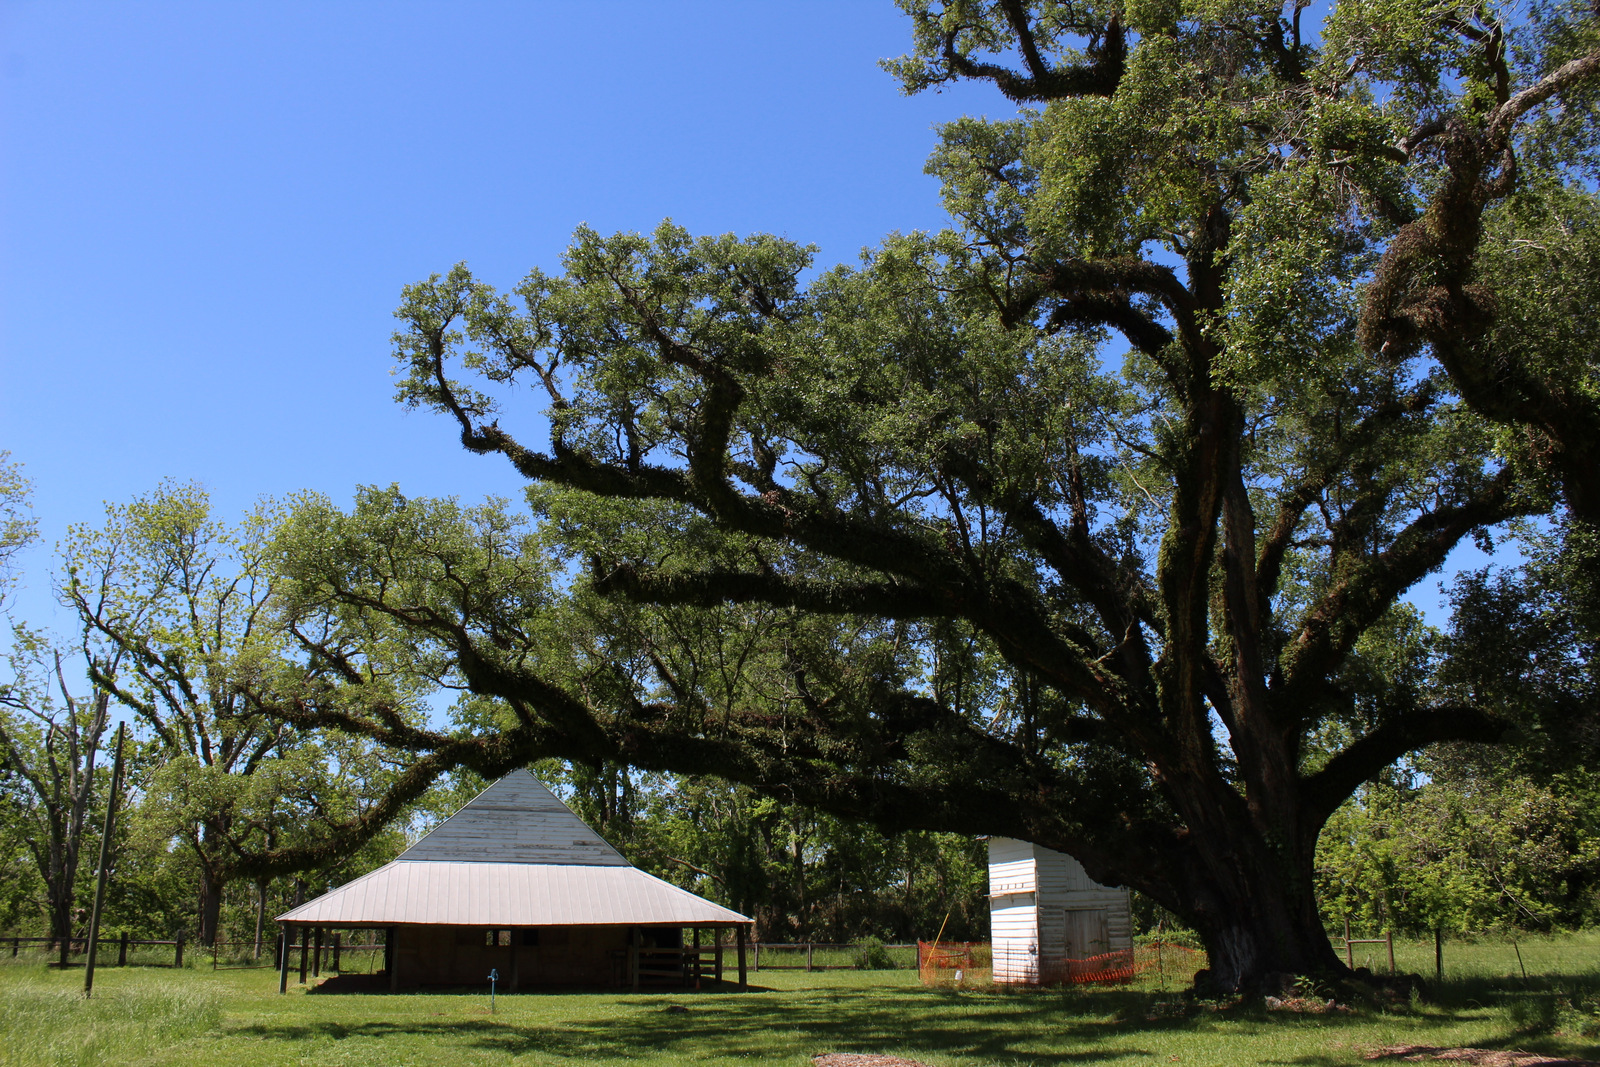 CANE RIVER CREOLE NATIONAL HISTORICAL PARK